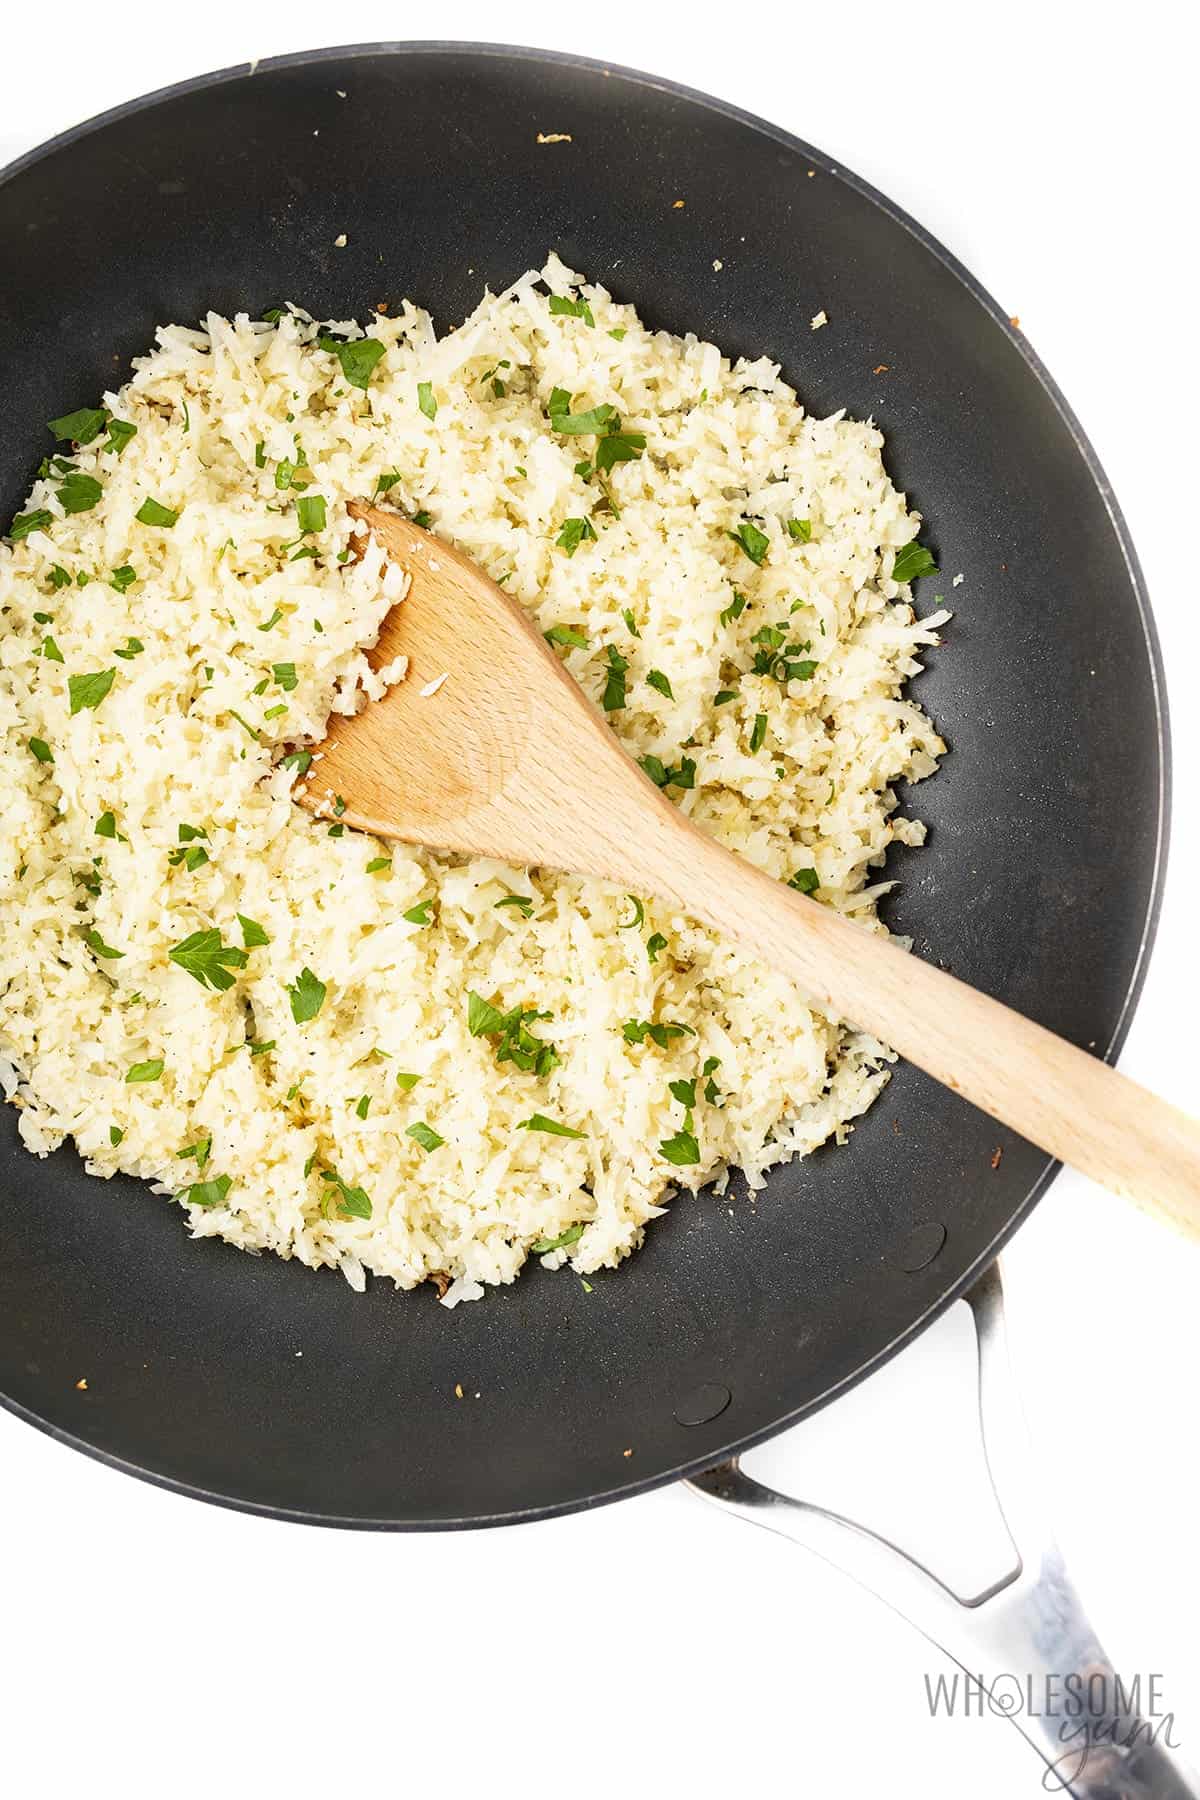 Cooking cauliflower rice in a frying pan